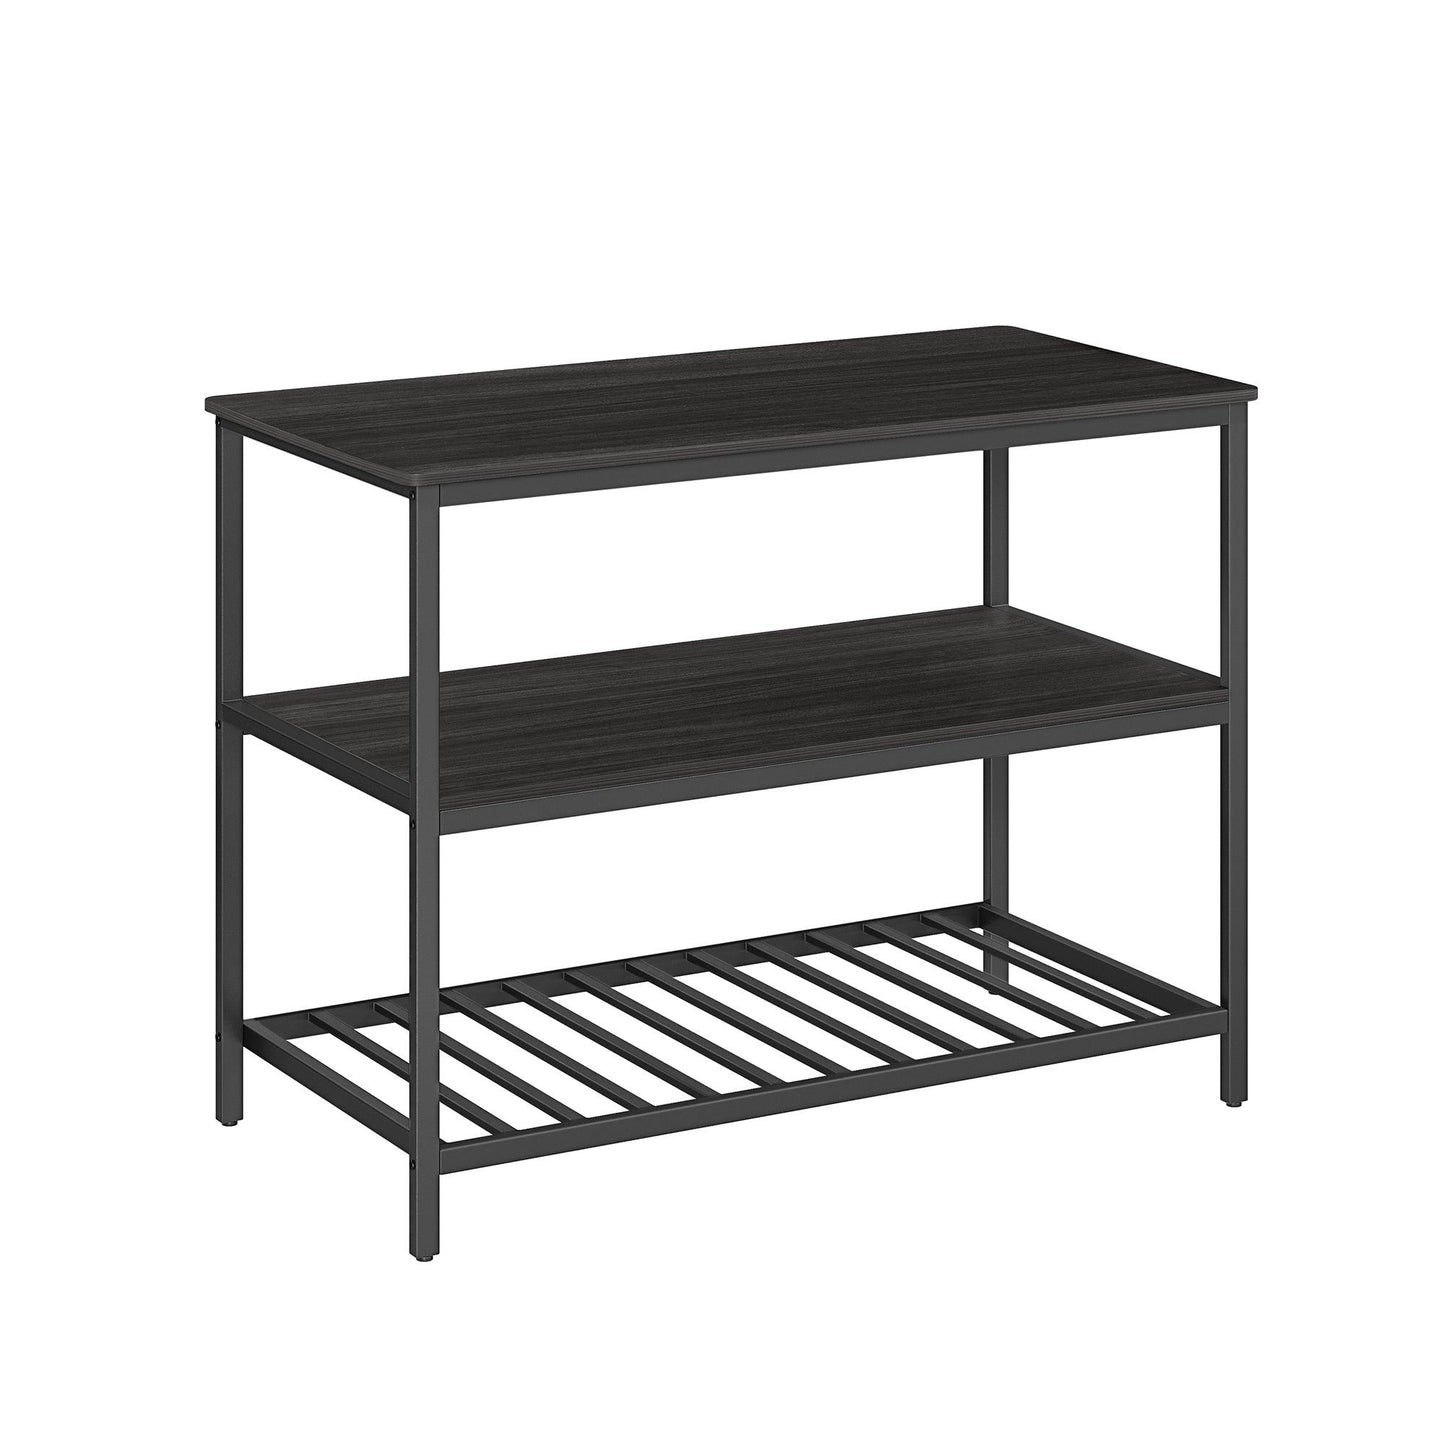 47.2 Inches Kitchen Shelf with Large Worktop